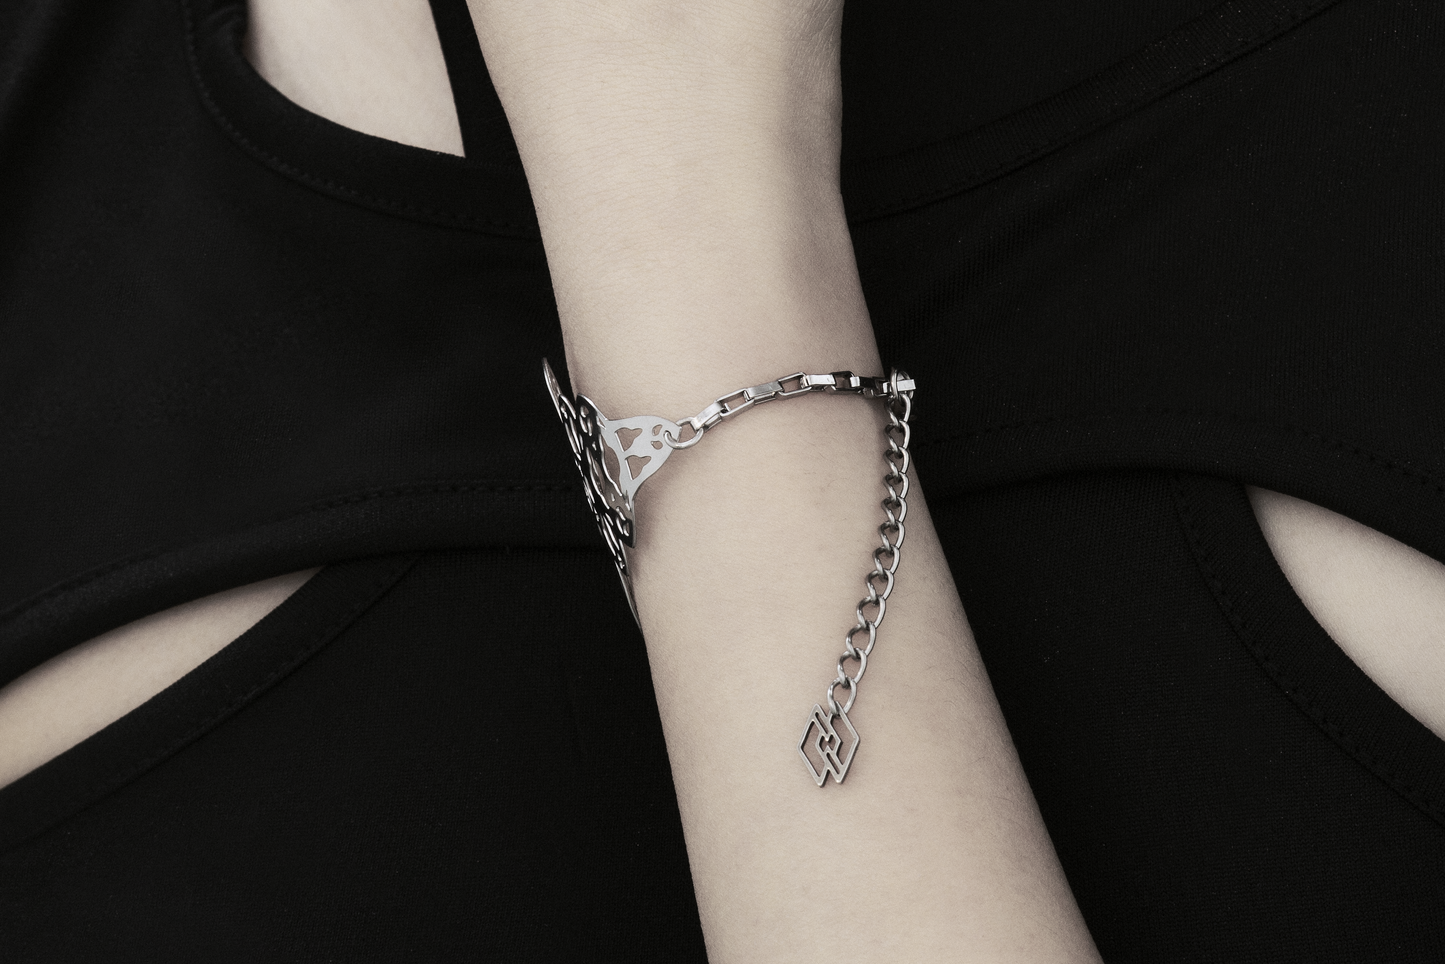 A model is featured wearing a Myril Jewels bracelet with a gothic architecture design. The intricate cut-out pattern creates a stunning visual effect against the simplicity of the black attire, making it a perfect accessory for those who favor gothic-chic or neo-goth styles, whether for daily wear or special events.